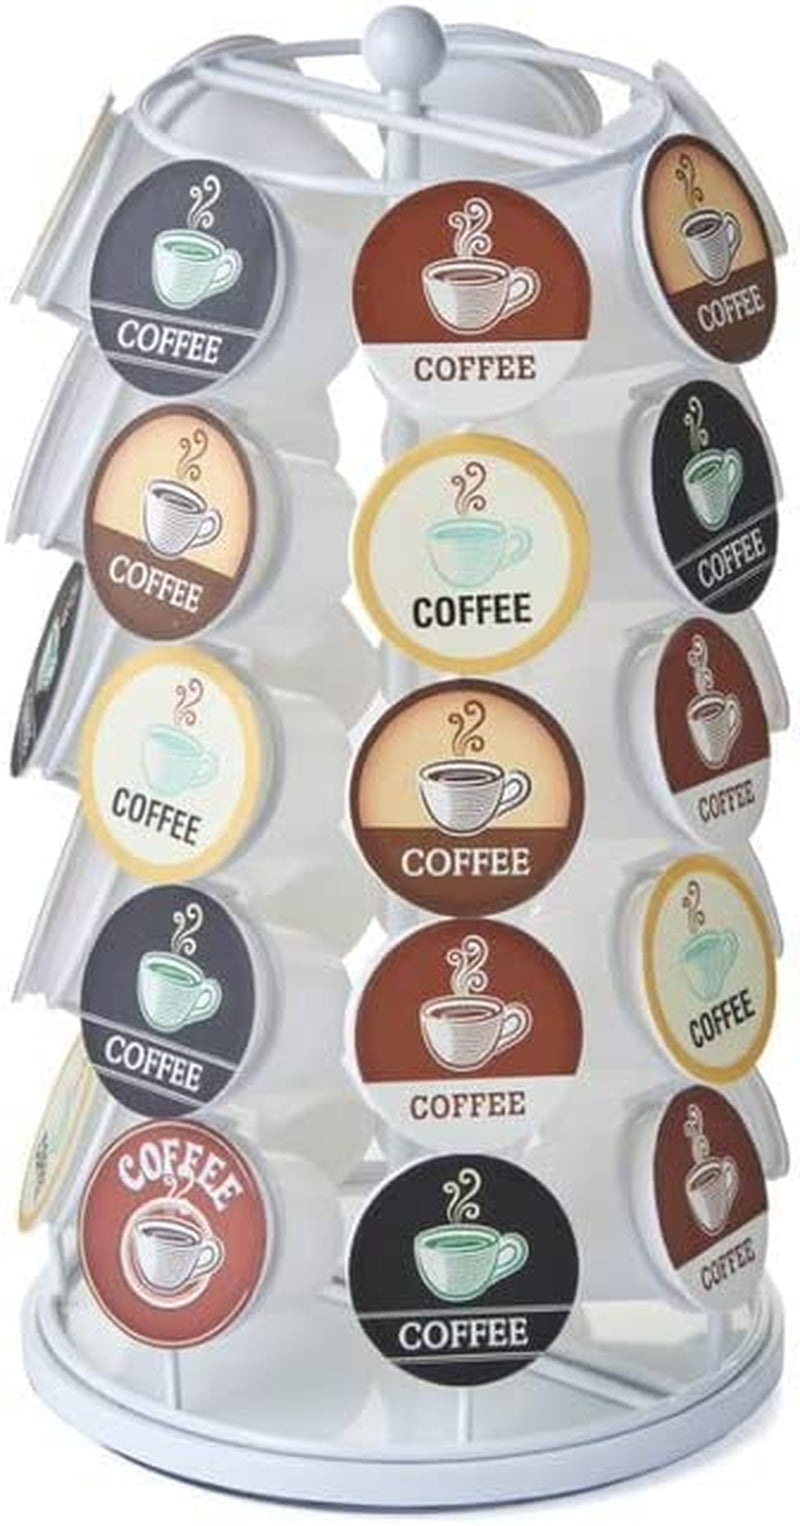 Nifty Coffee Pod Carousel – Compatible with K-Cups, 35 Pod Pack Storage, Spins 360-Degrees, Lazy Susan Platform, Modern Black Design, Home or Office Kitchen Counter Organizer Home & Garden > Household Supplies > Storage & Organization NIFTY 35 Pod Capacity|White  